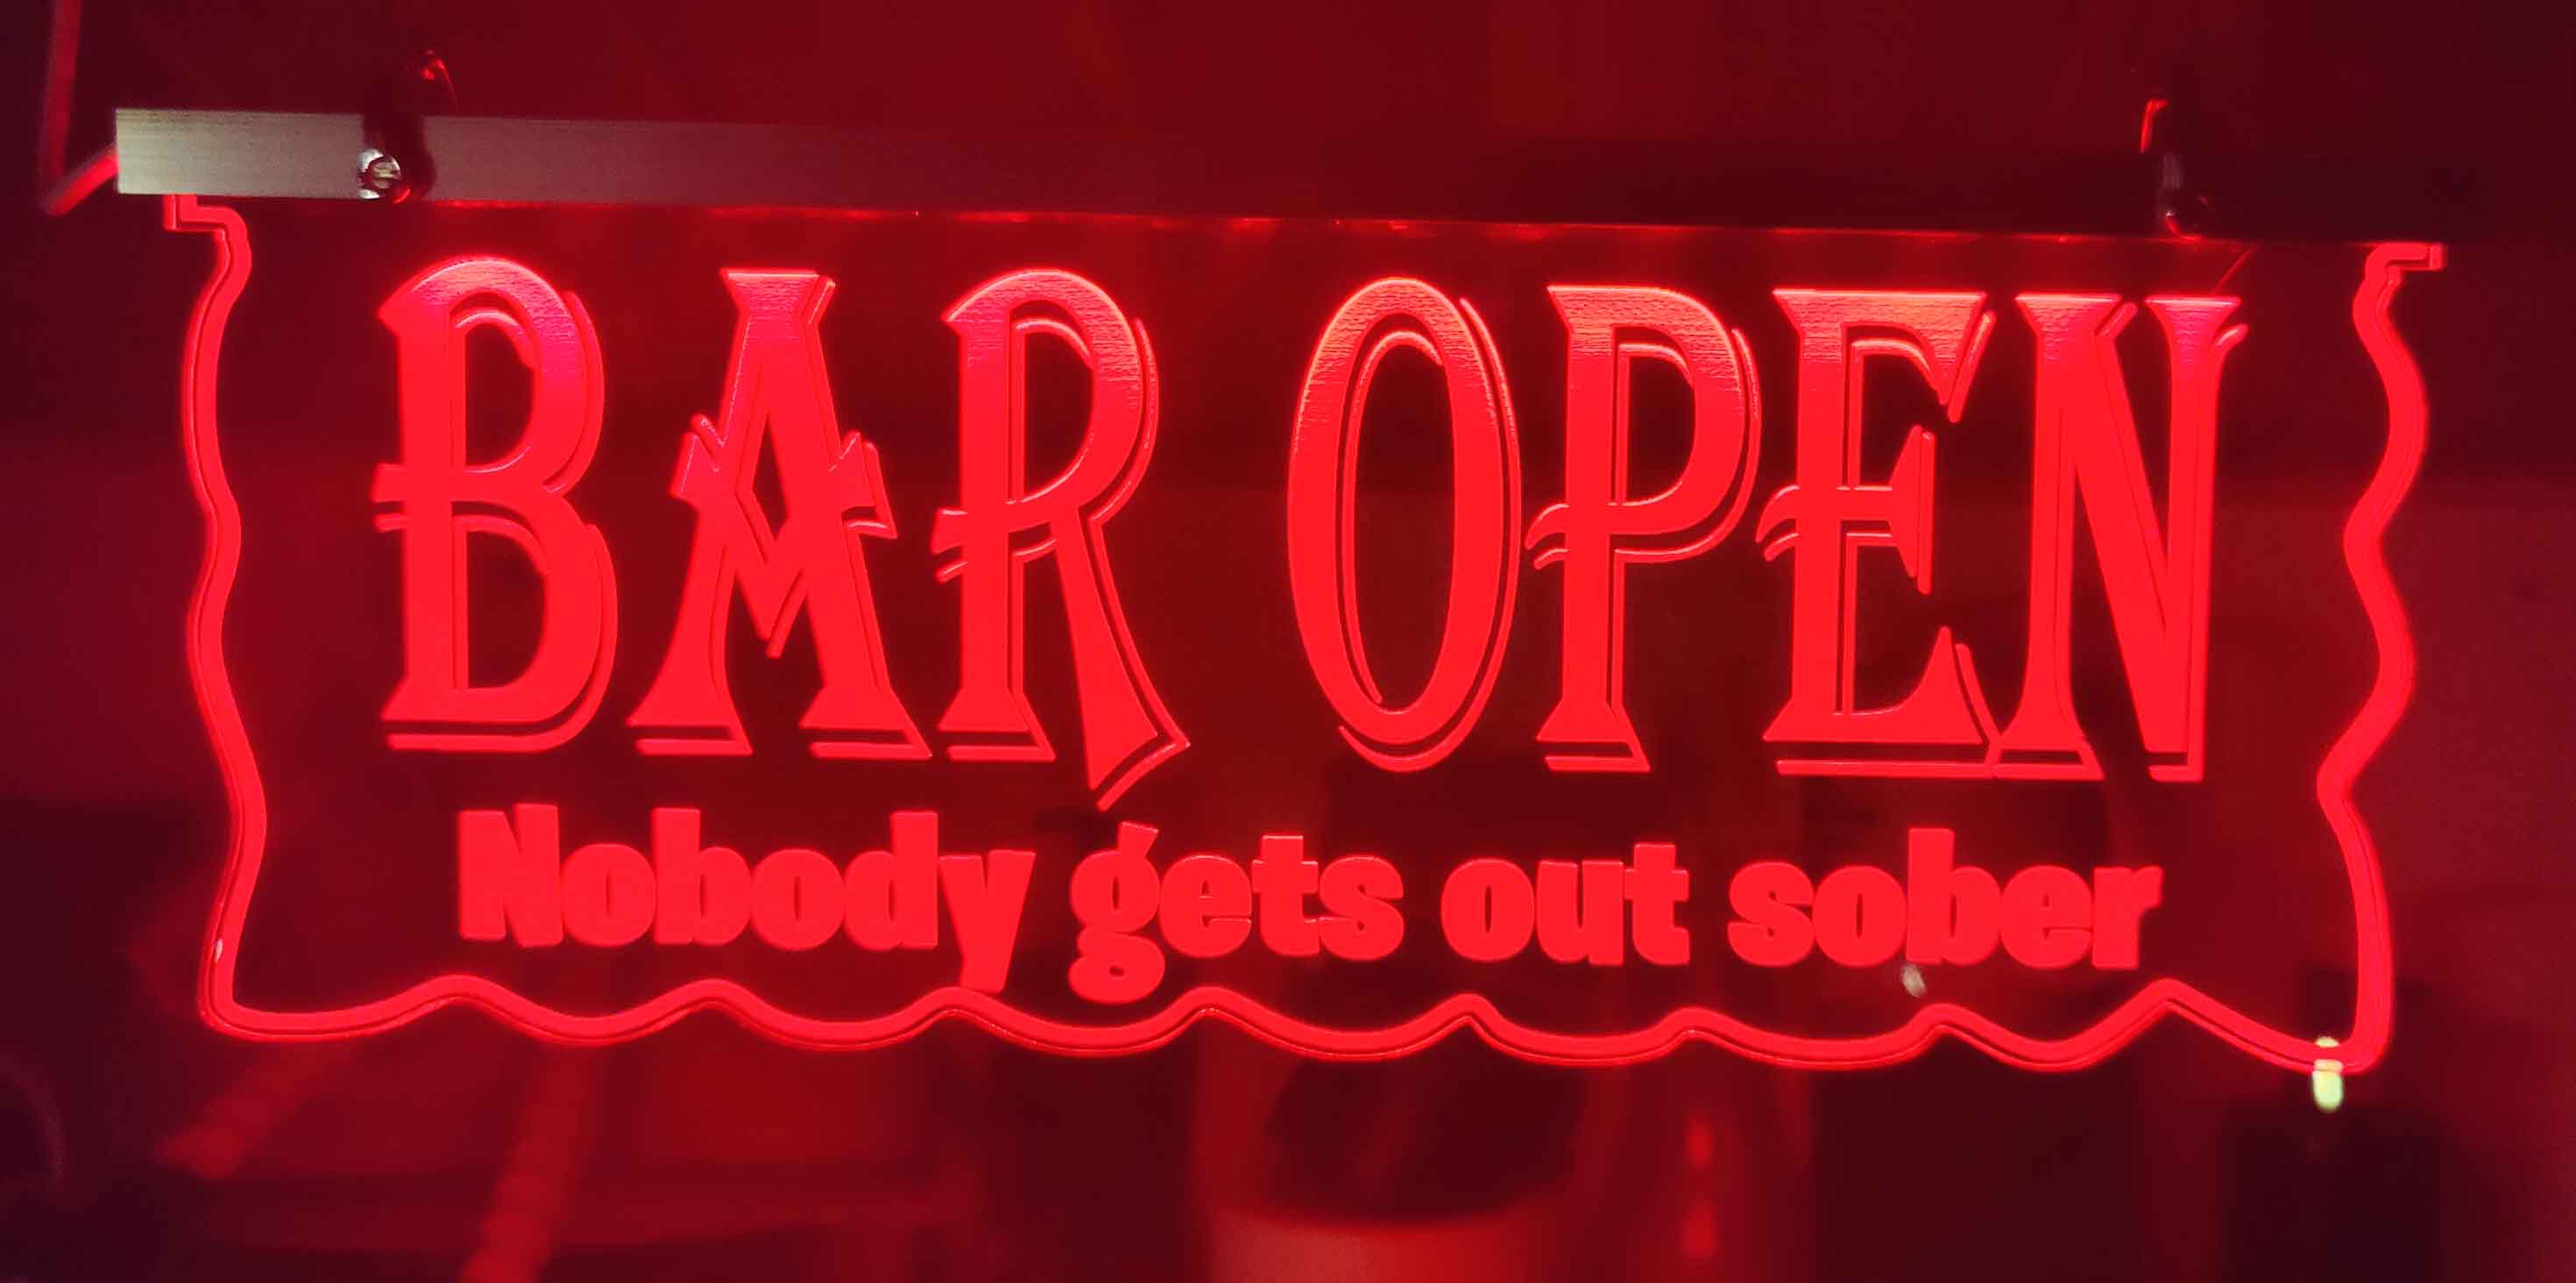 bar open led sign with nobody gets out sober for bars mancaves 